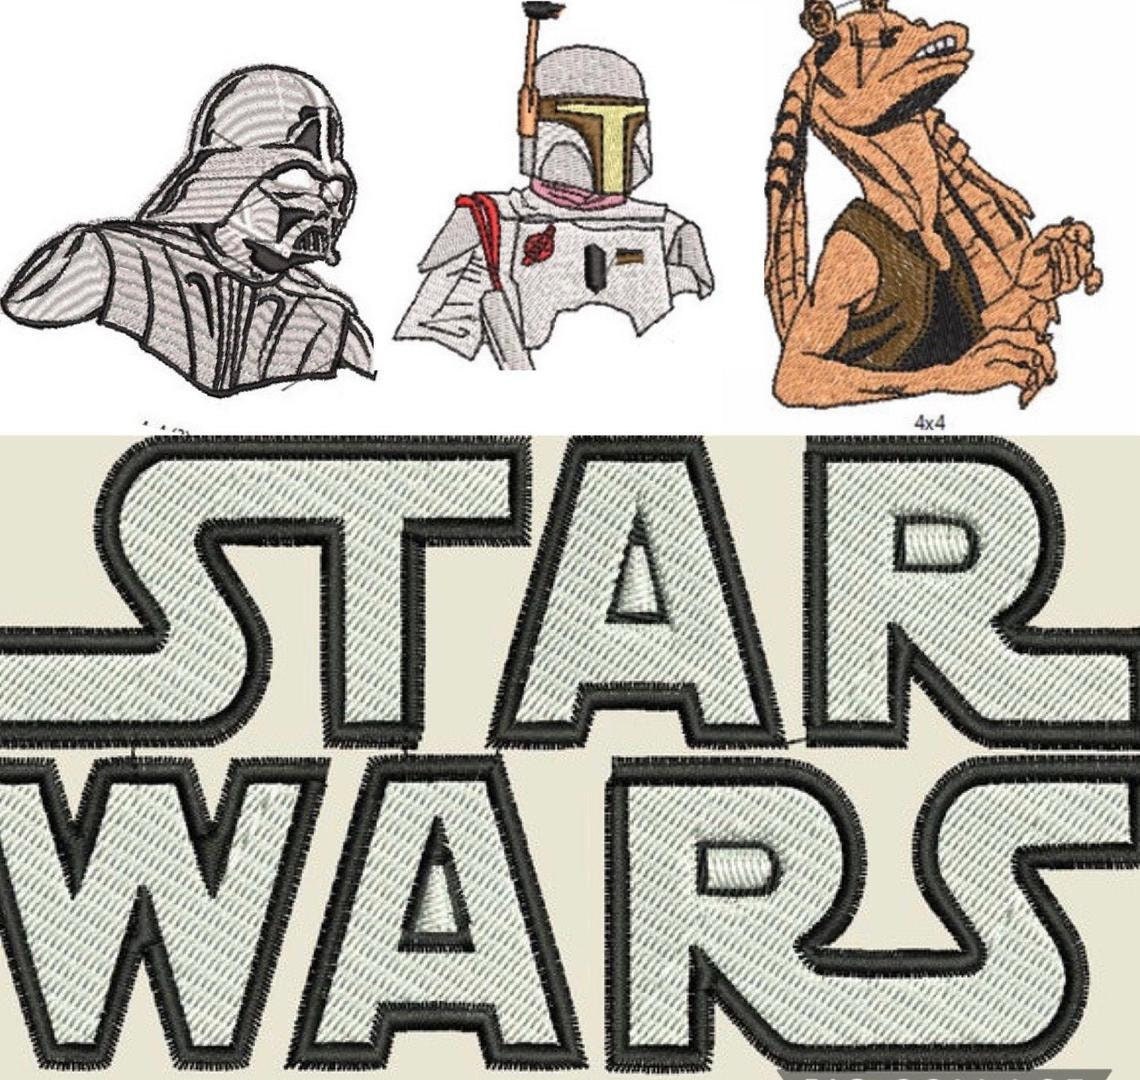 Embroidery Star Wars - ikdctgfht1